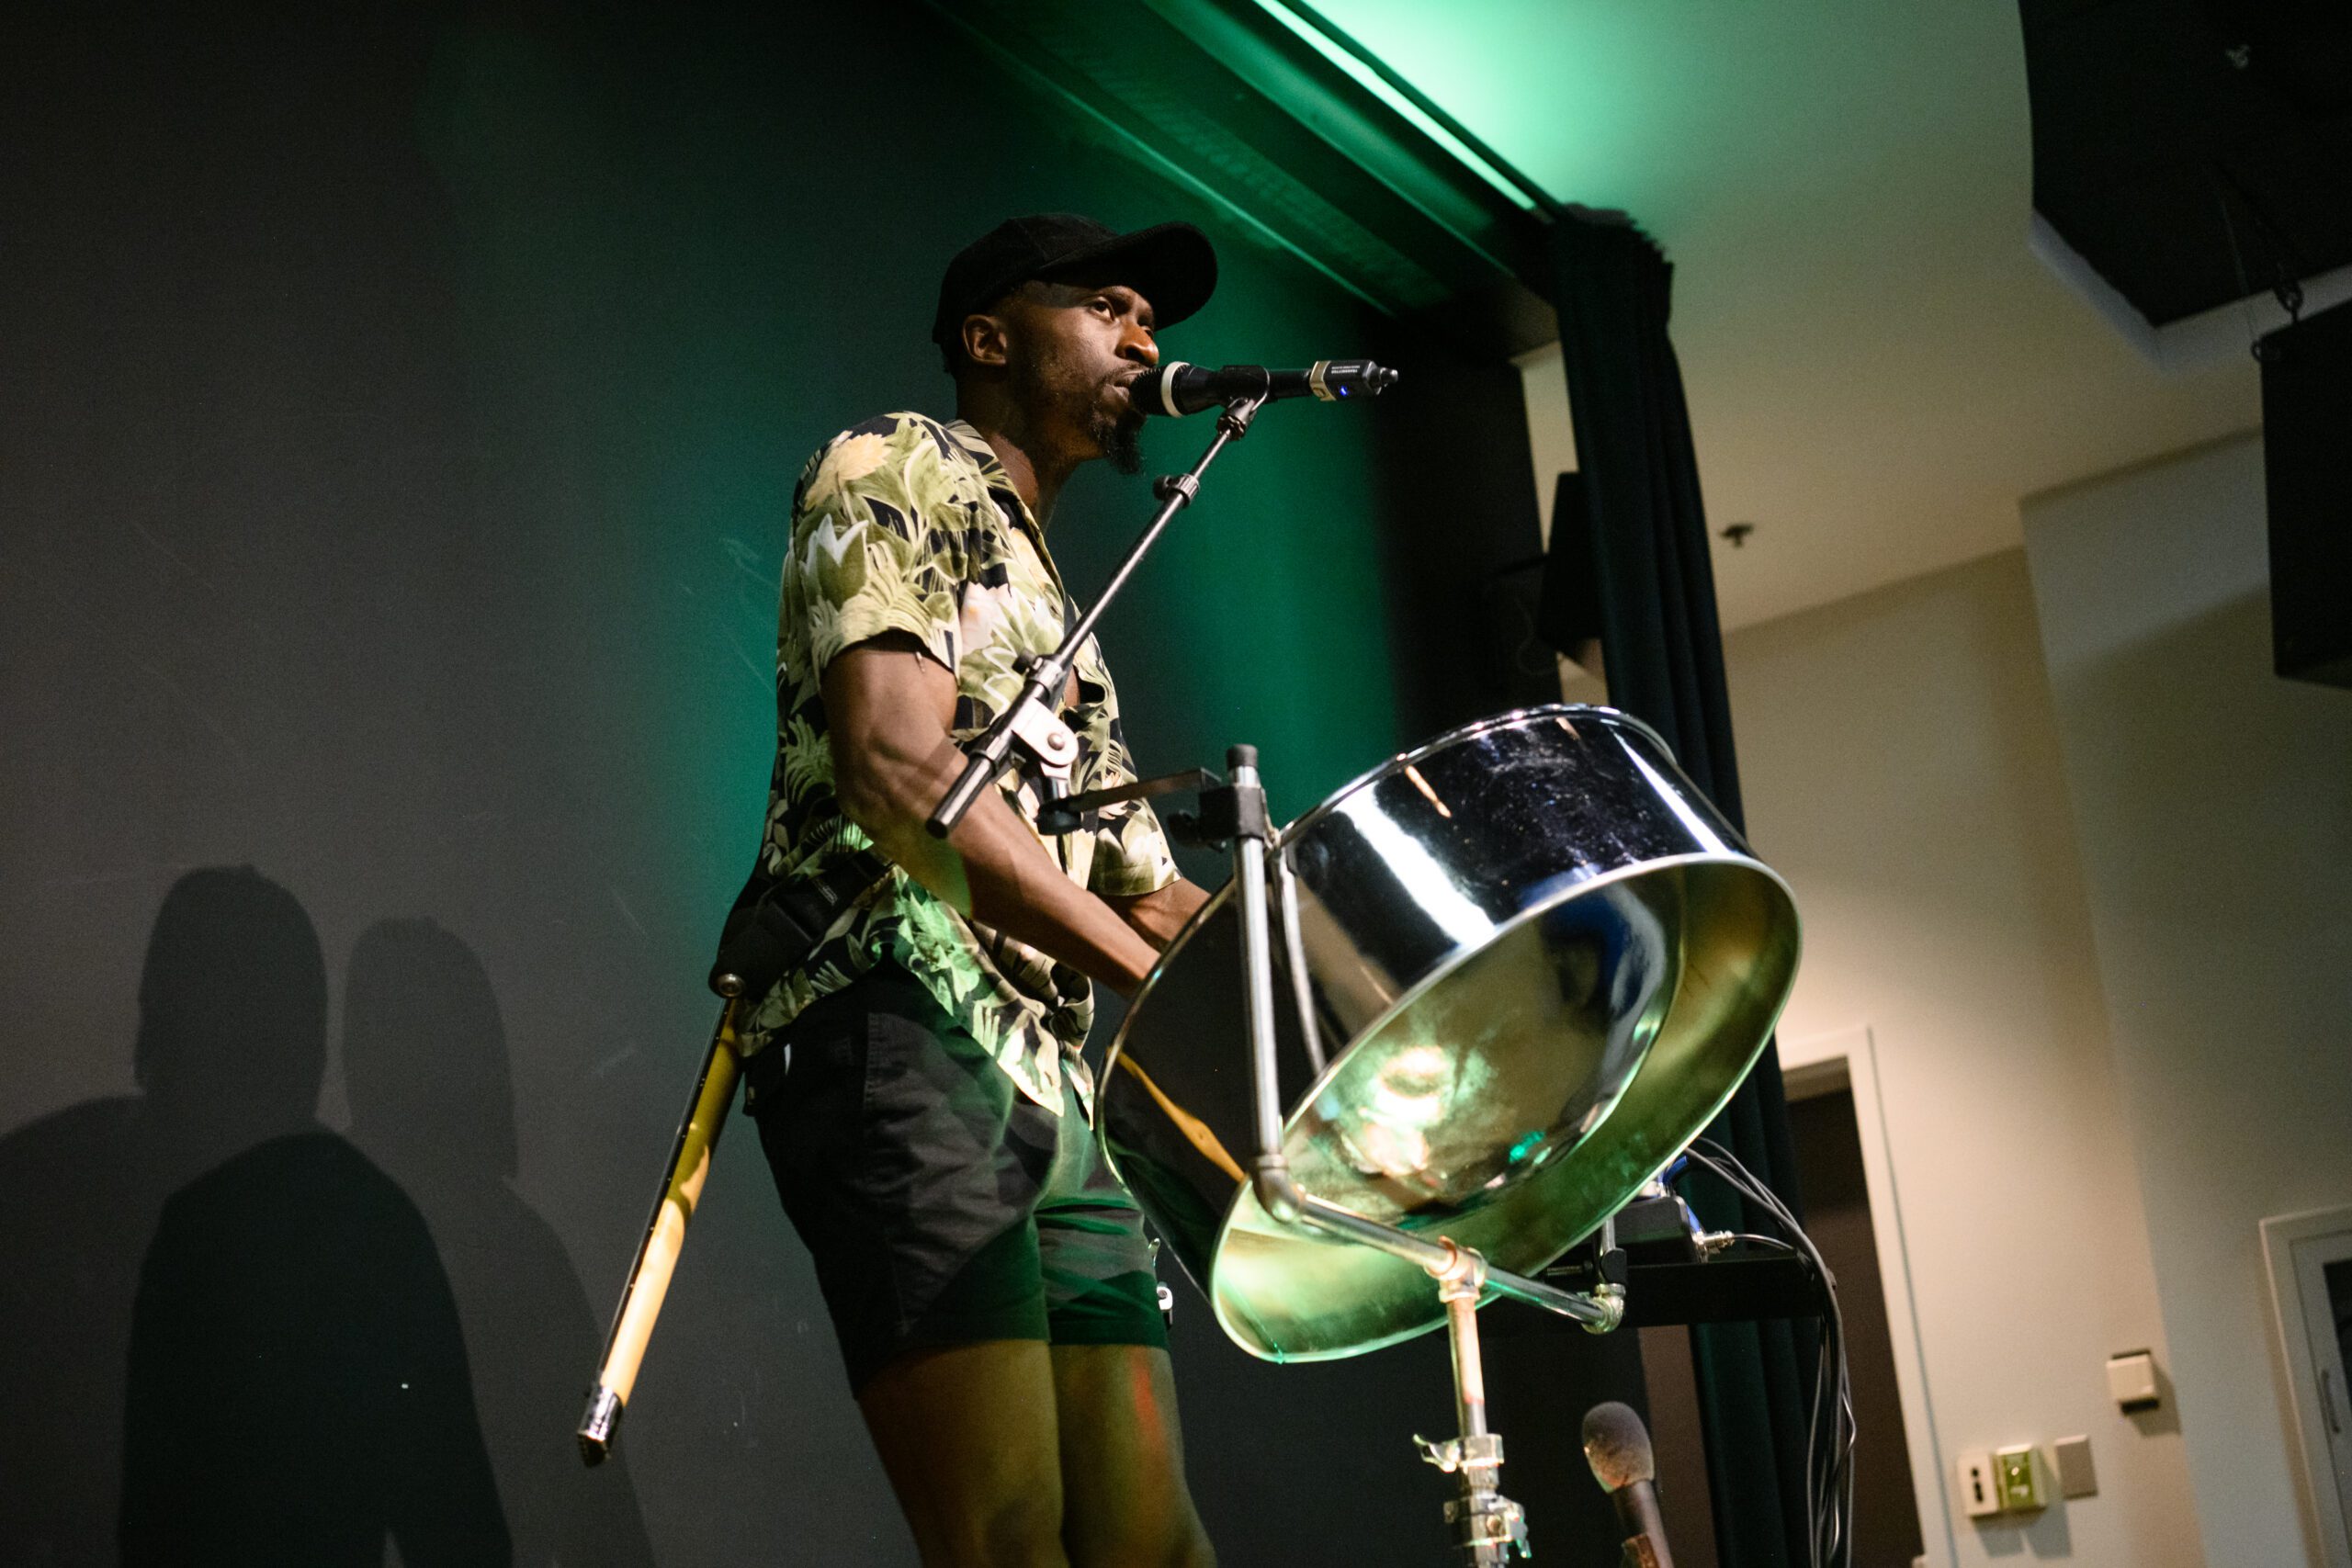 A steel drum player is on a stage performing.